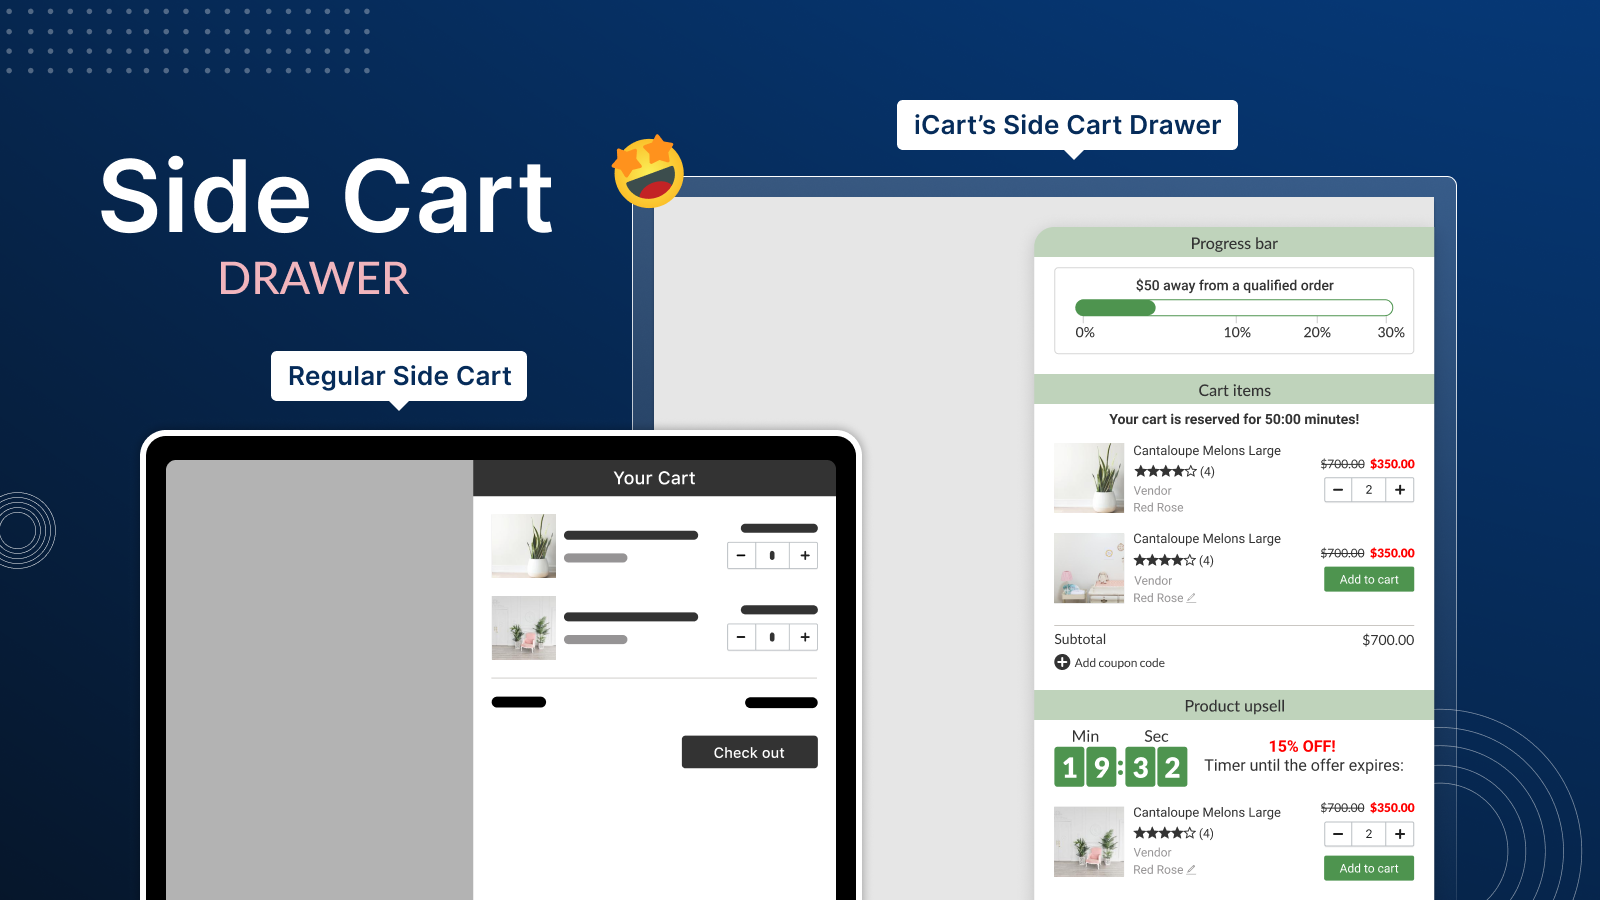 Show in cart upsell, free gift, cart discount in cart drawer